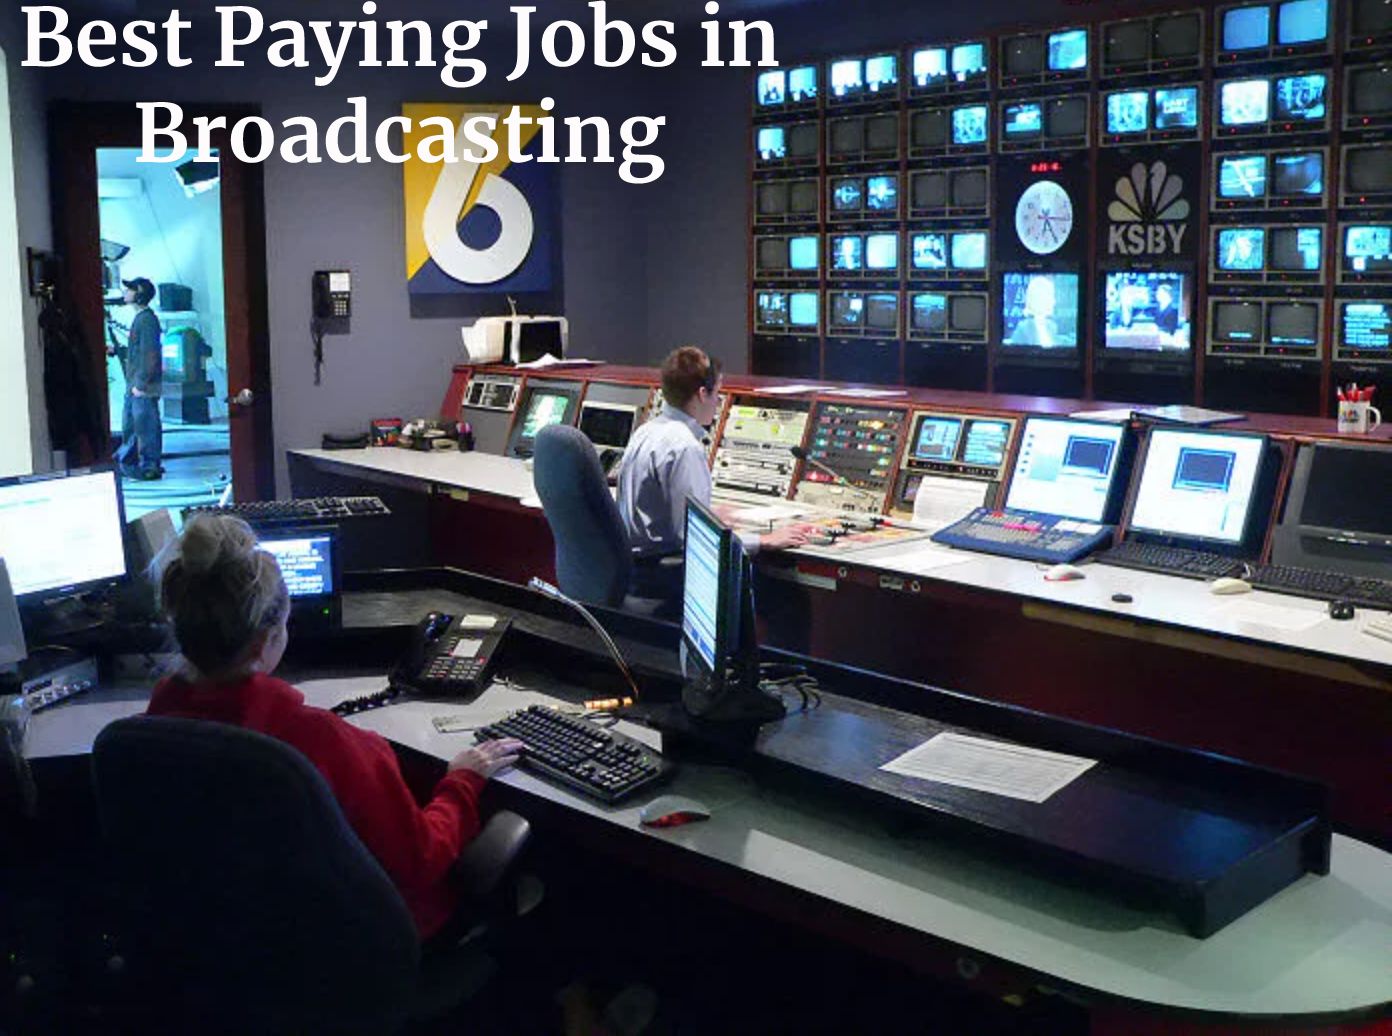 Best Paying Jobs in Broadcasting